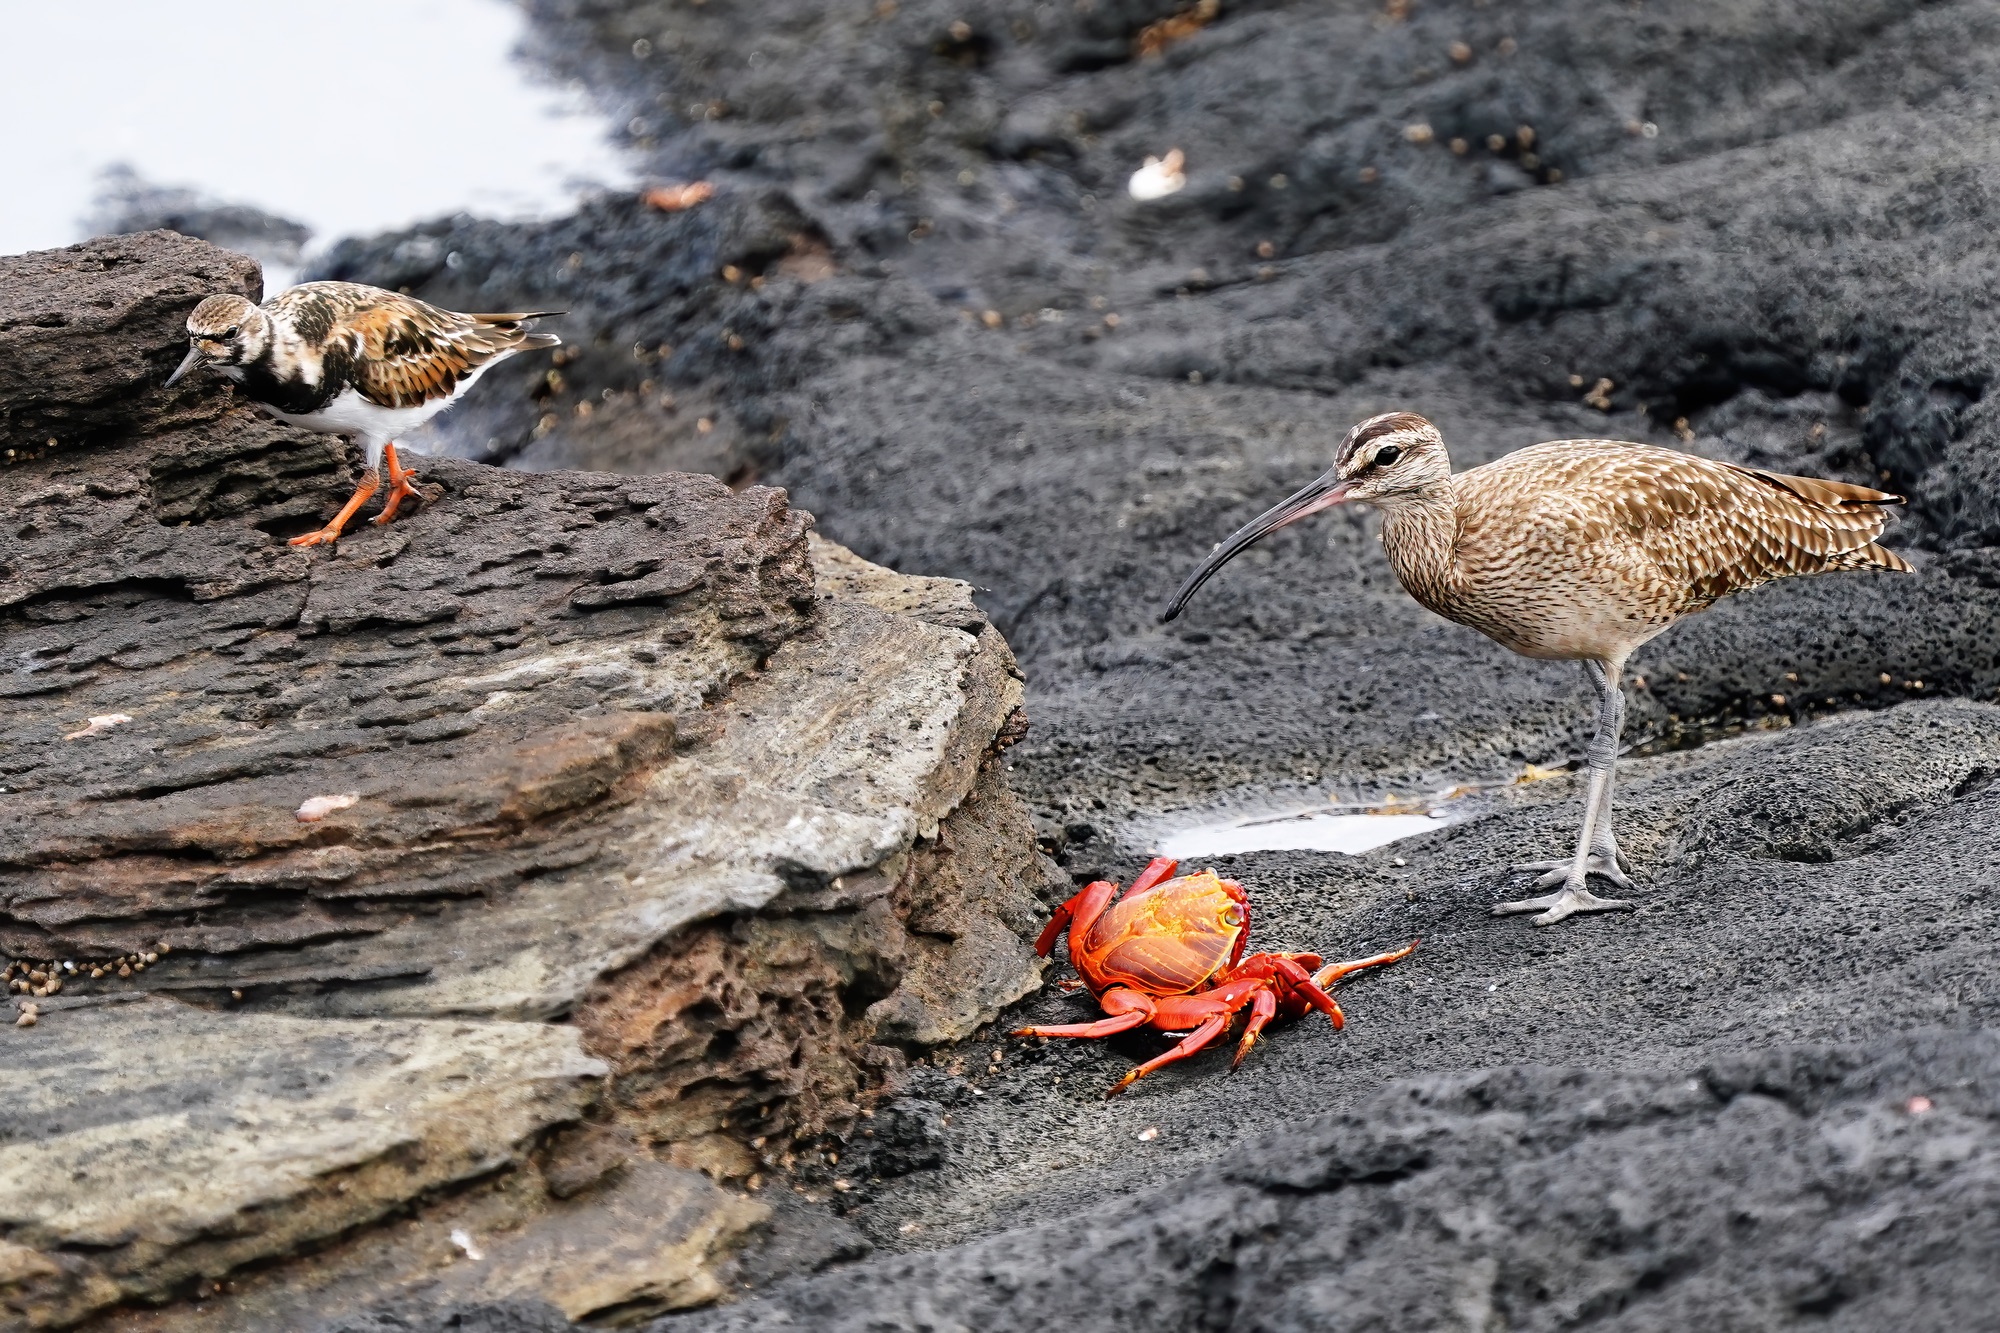 Galapagos Islands Yacht-Based Tour & Guided Photography Experience - Wimbrel and sally lightfoot crab